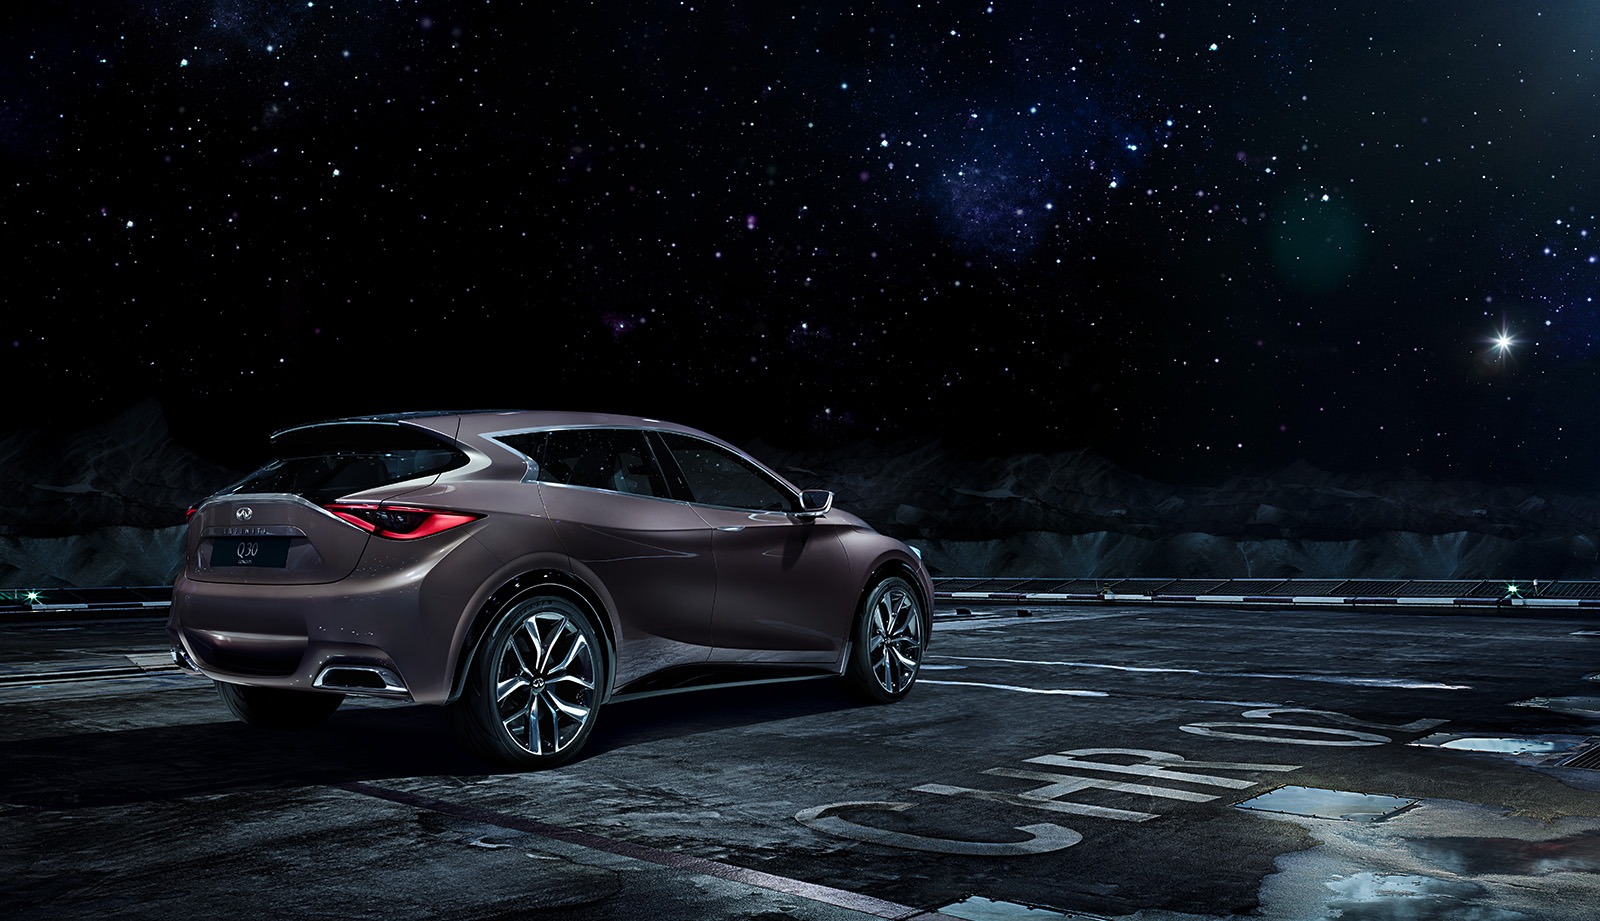 Infiniti Q30 - In outer space